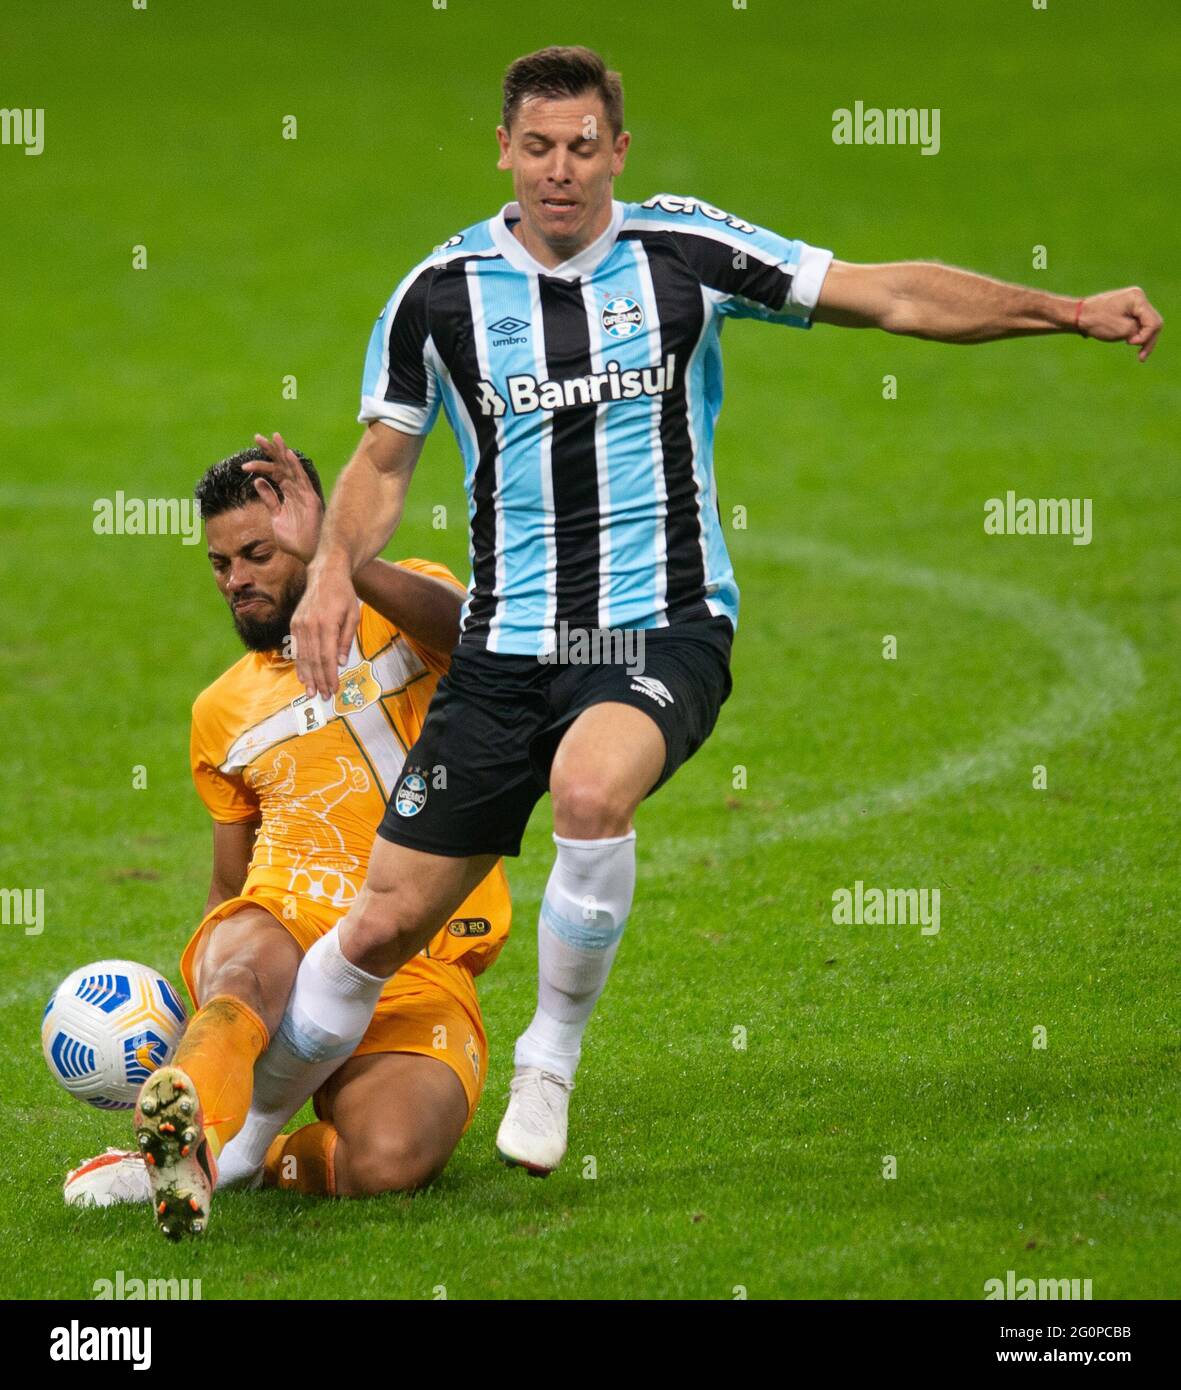 2nd June 2021; Arena do Gremio, Porto Alegre, Brazil; Copa Do Brazil, Gremio versus Brasiliense; Diego Chur&#xed;n of Gremio is tackled from behind by Gustavo Henrique of Brasiliense Stock Photo